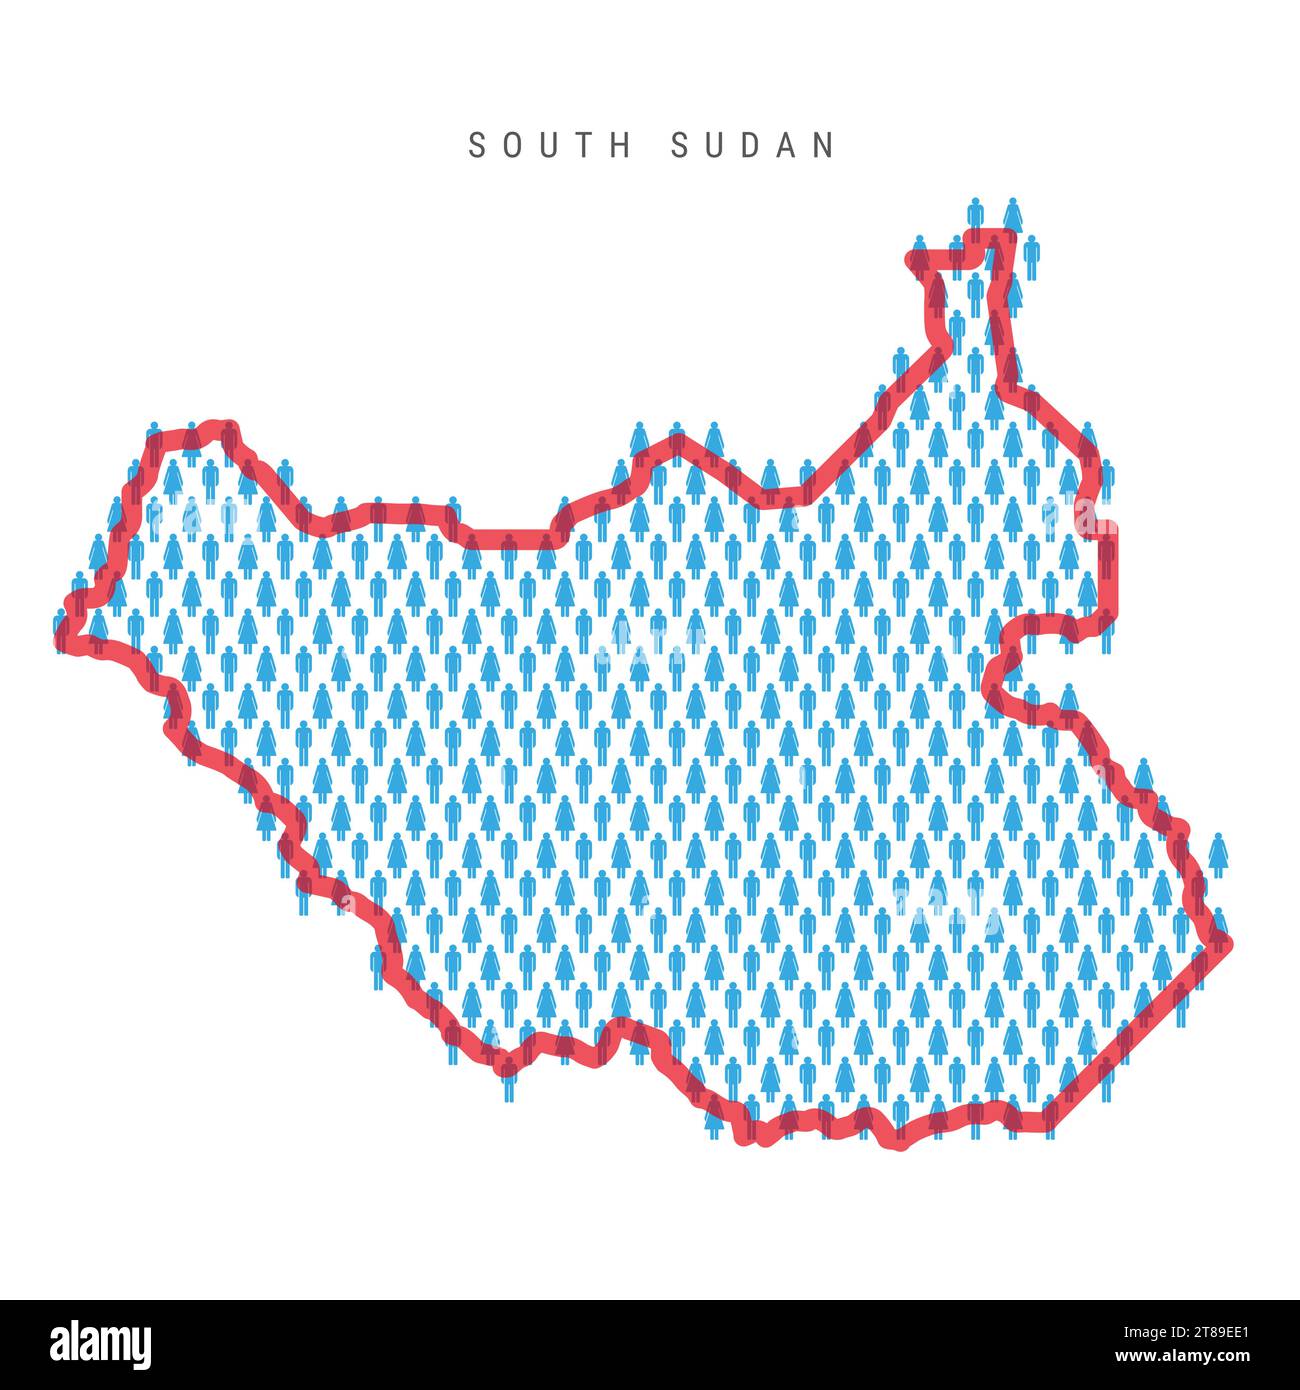 South Sudan population map. Stick figures Sudanese people map with bold red translucent country border. Pattern of men and women icons. Isolated vecto Stock Vector